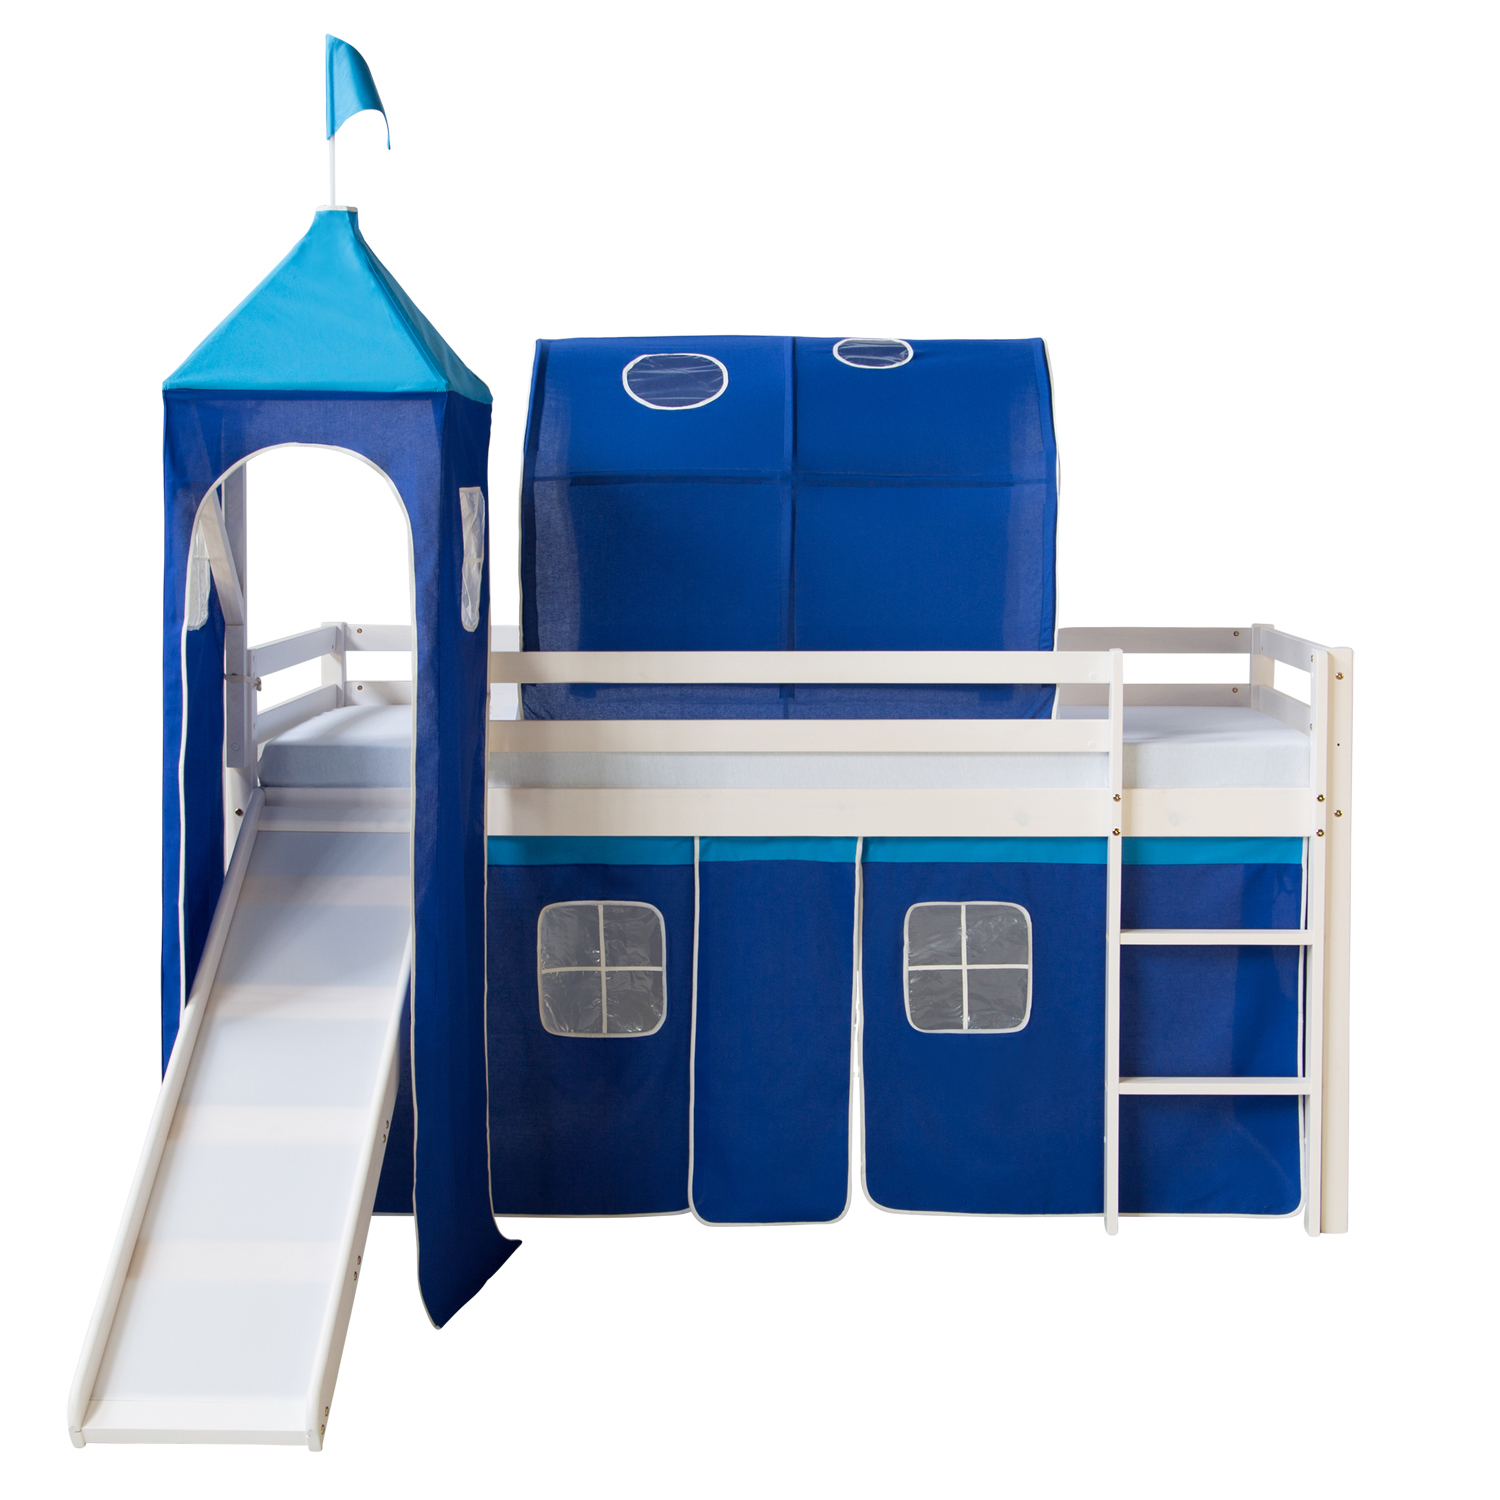 Childrens Bed Tunnel Bed Tent Bunk Bed Cabin Bed accessories blue